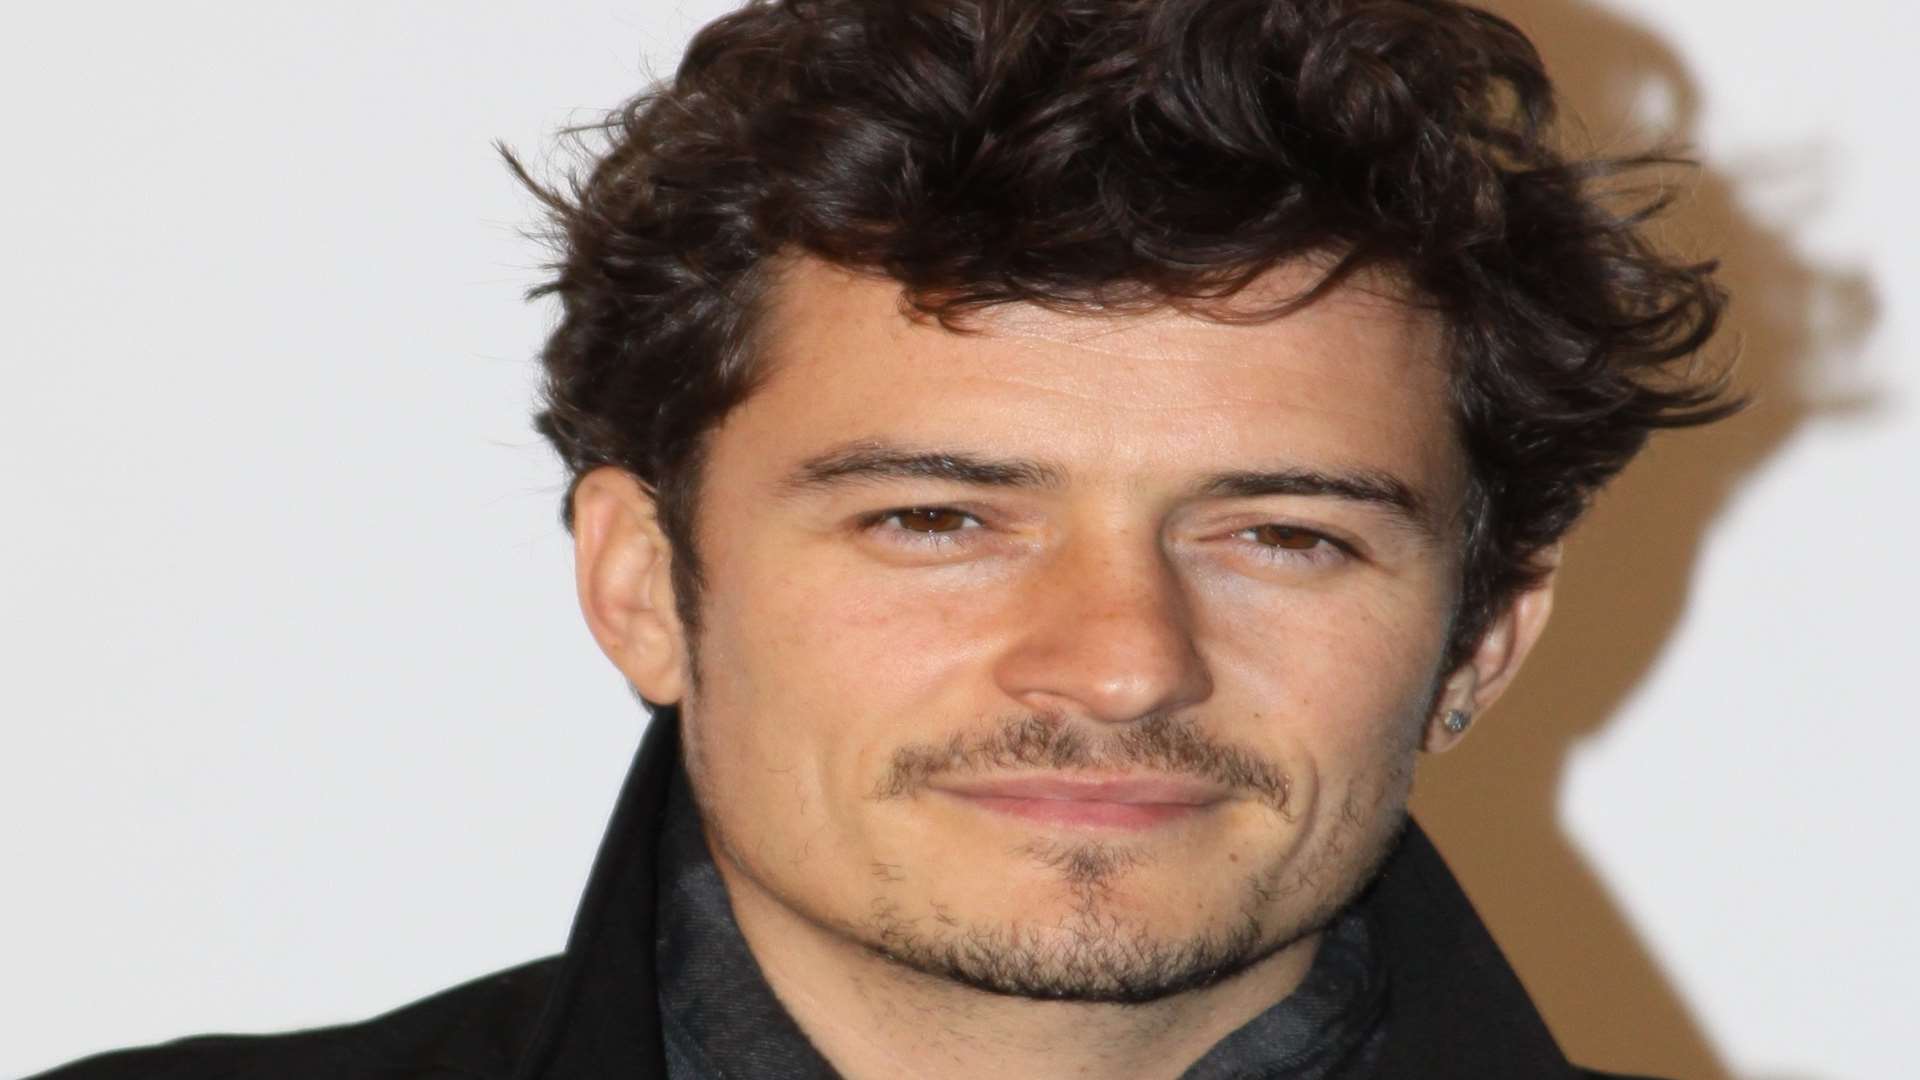 Orlando Bloom has set Twitter on fire with his naked pictures. Picture: Promiflash